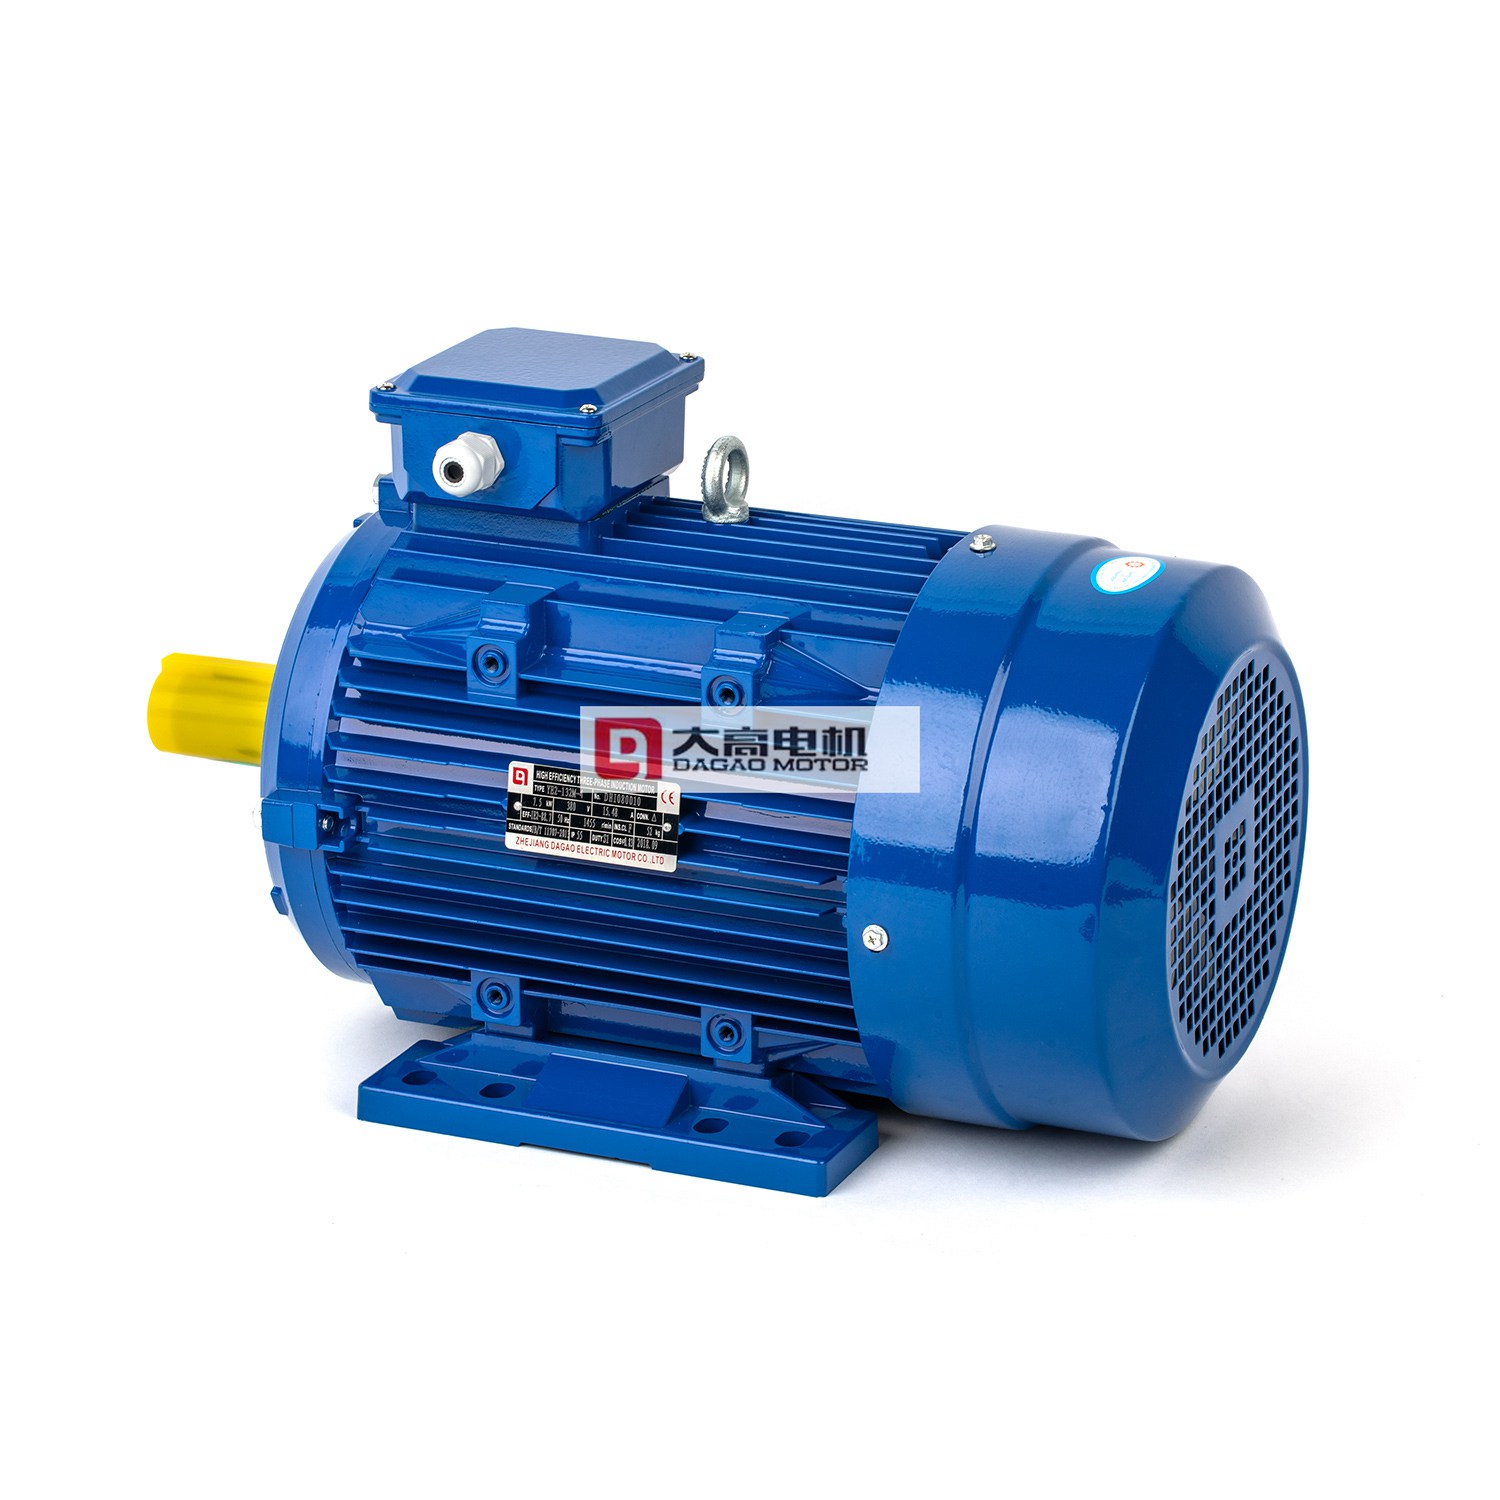 Discount Price Shaded Pole Induction Motor - 1.5hp/1.1kw YE3 Series Three Phase Asynchronous Motor(YE3-80M2-2)3000r/min – Dagao Featured Image